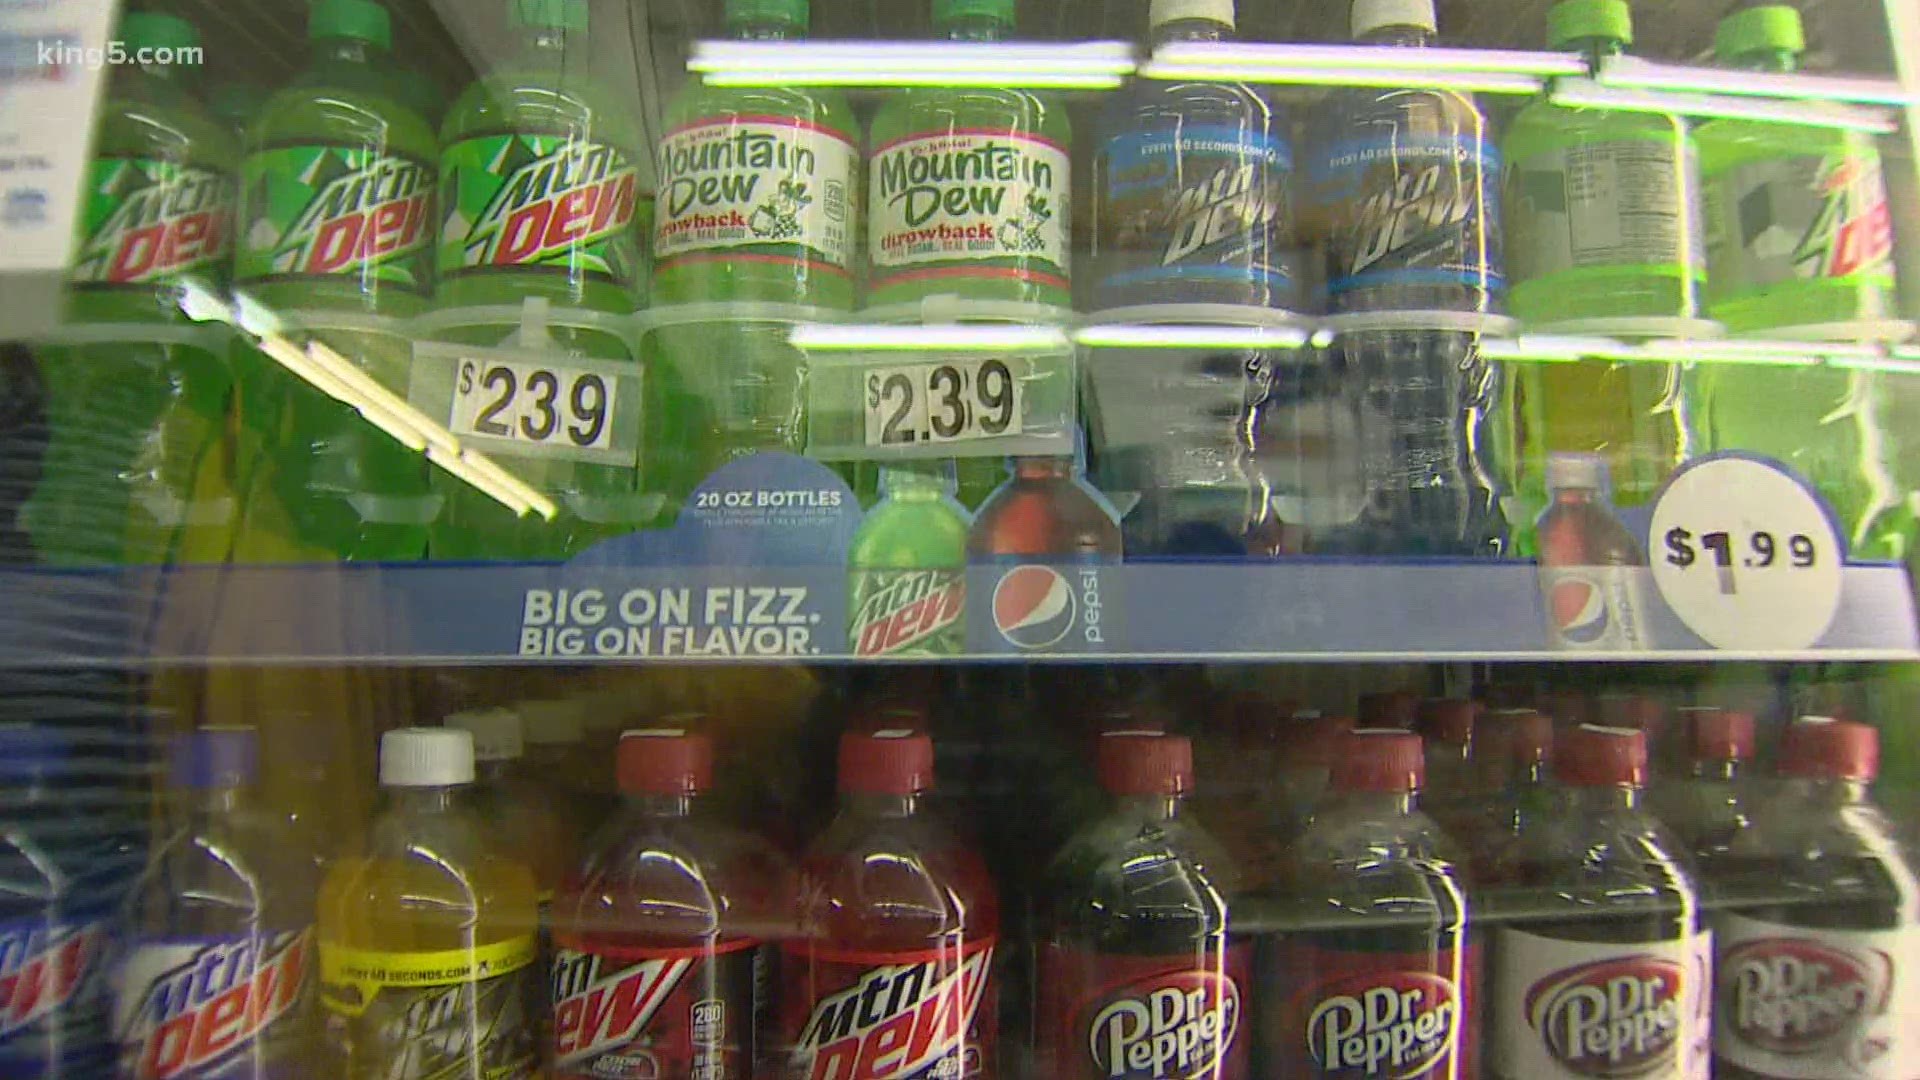 Seattle imposed a tax on sugary drinks and people drank less soda. But researchers also found that soda-drinking is down in nearby cities without a similar tax